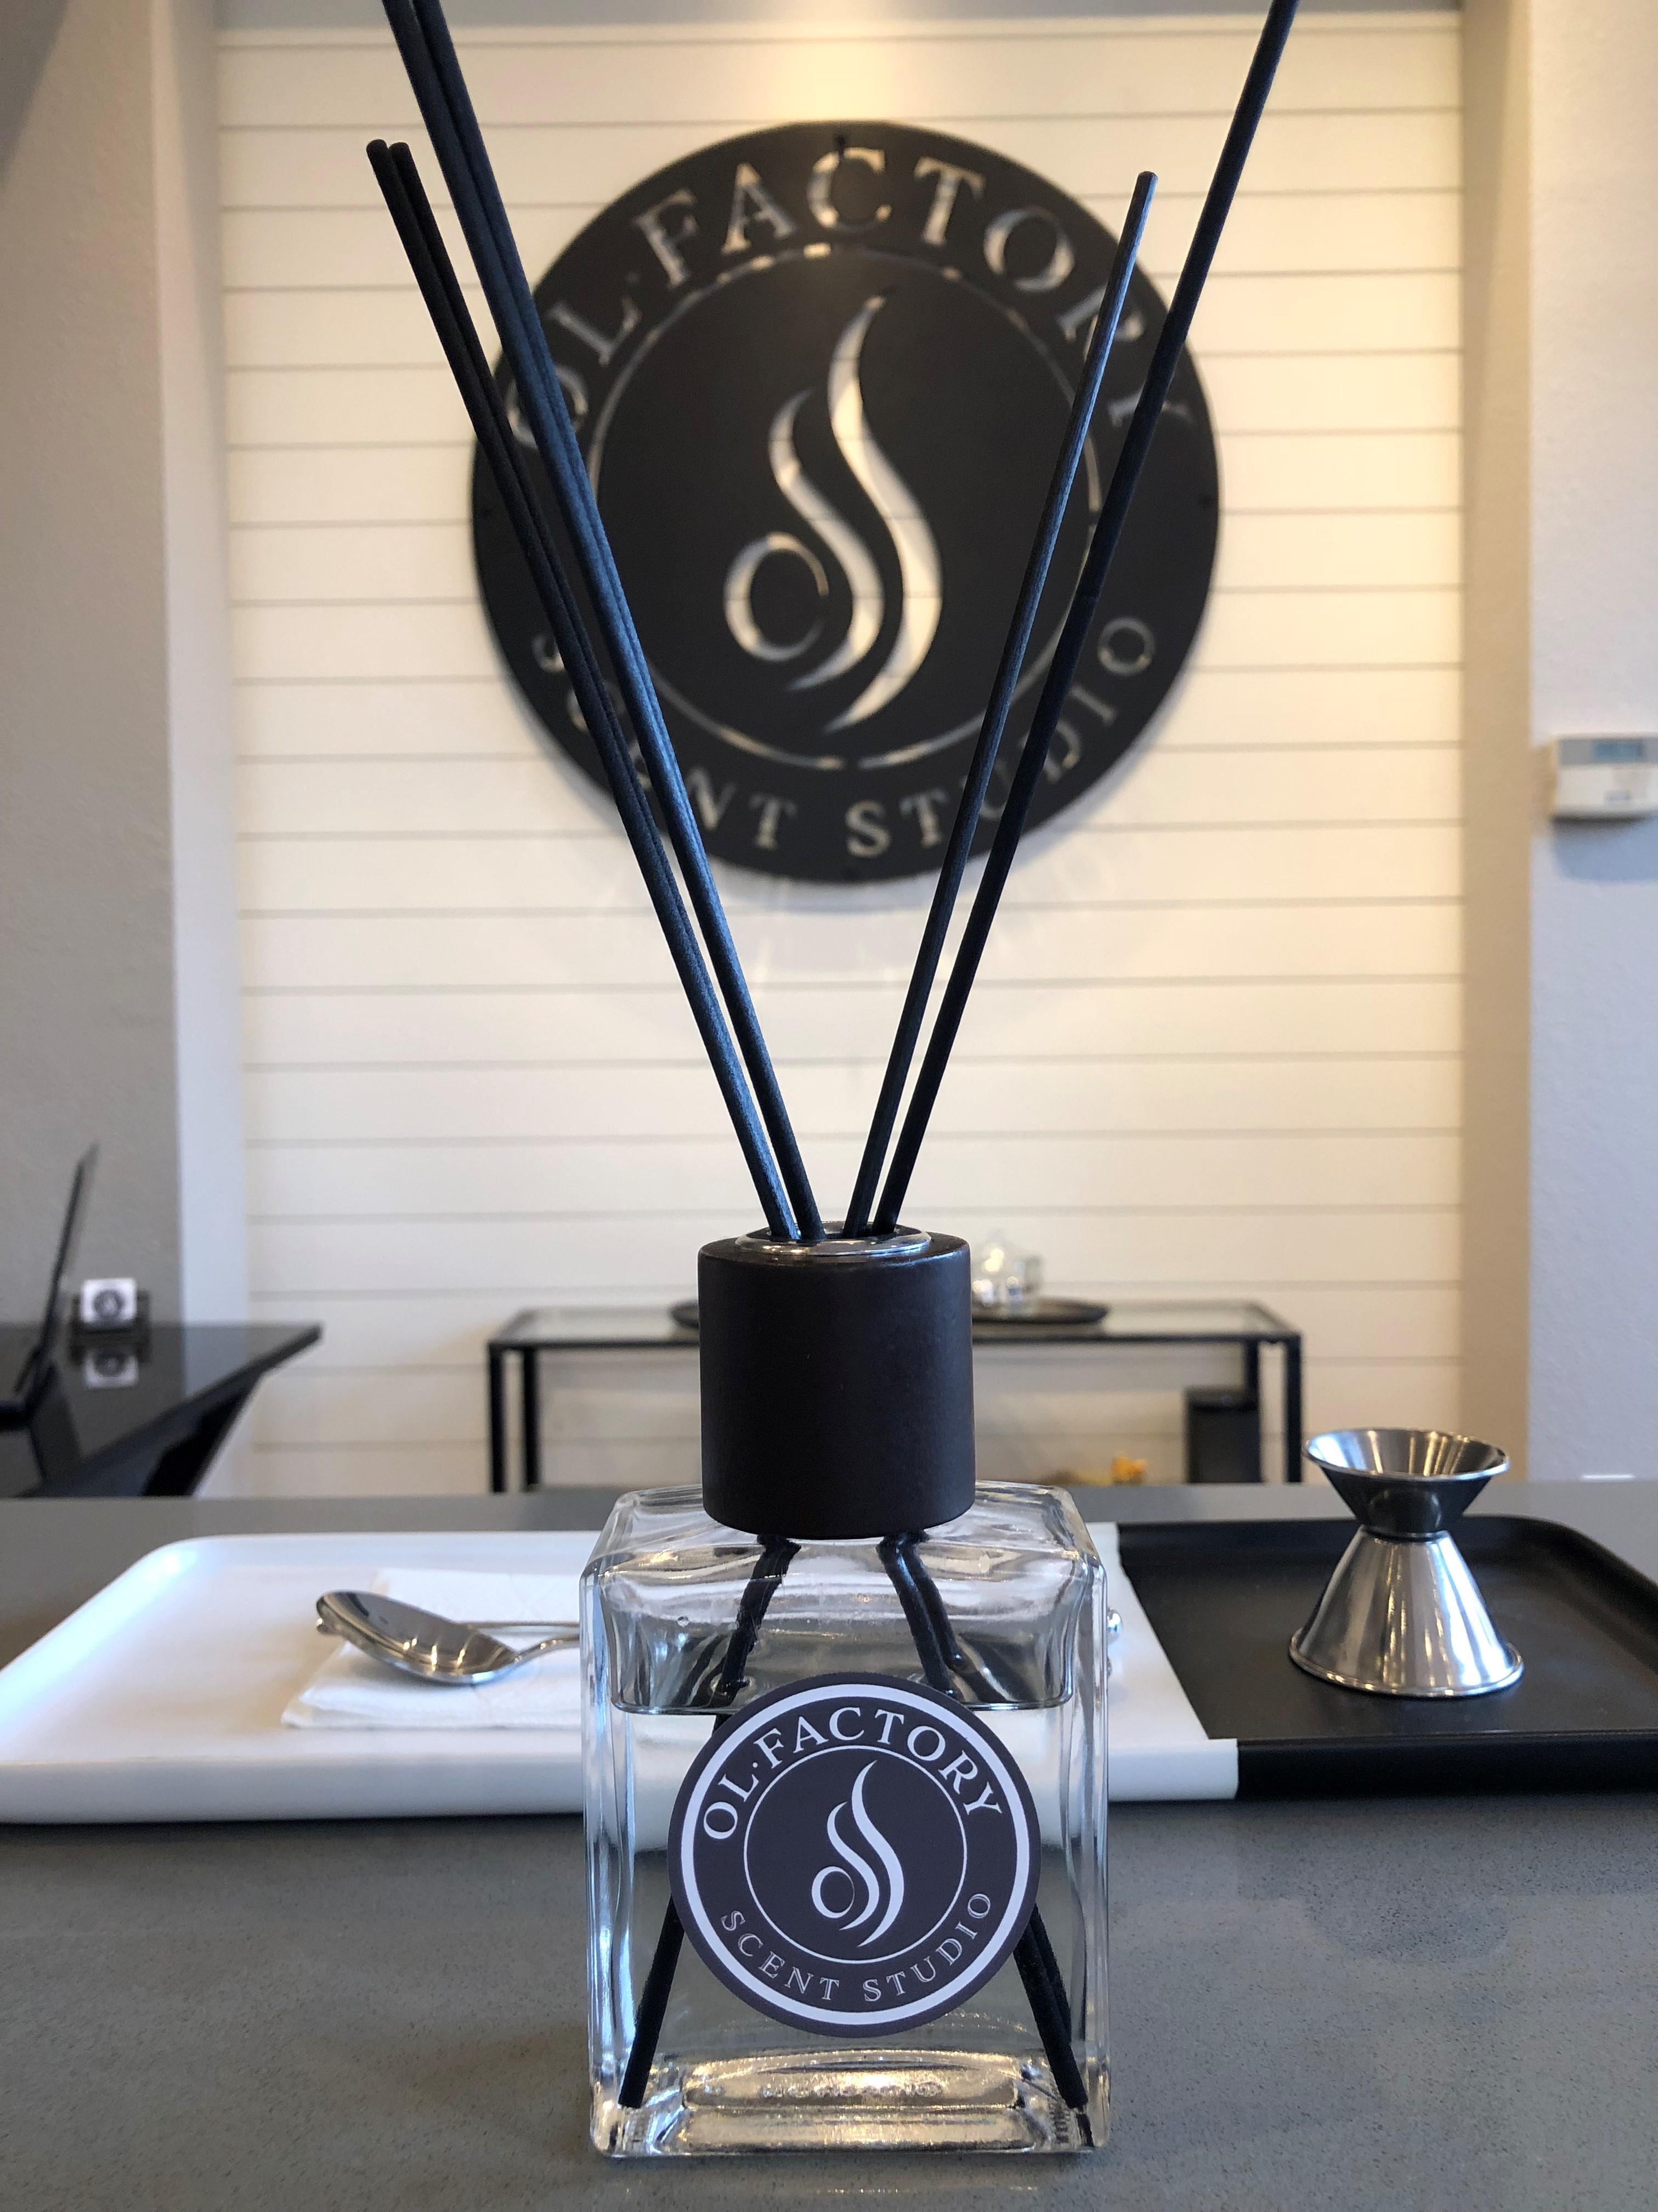 Olfactory Scent Studio also offers reed diffusers that can release a slow and steady fragrance for 1 Olfactory Scent Studio Maple Grove (763)350-6953